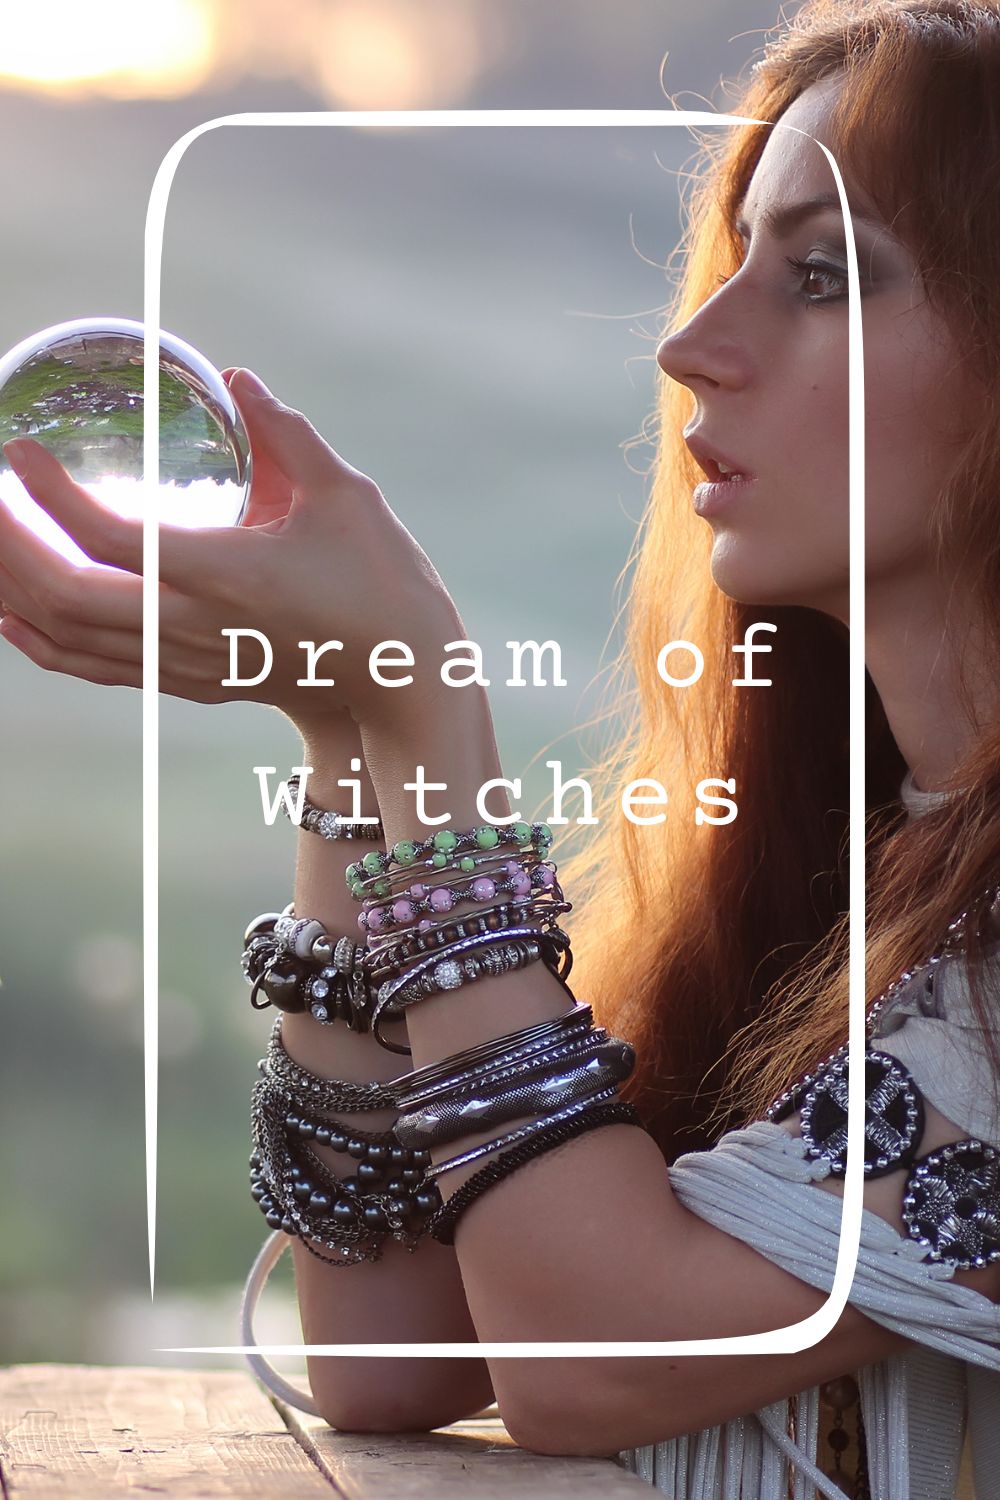 13 Dream of Witches Meanings4